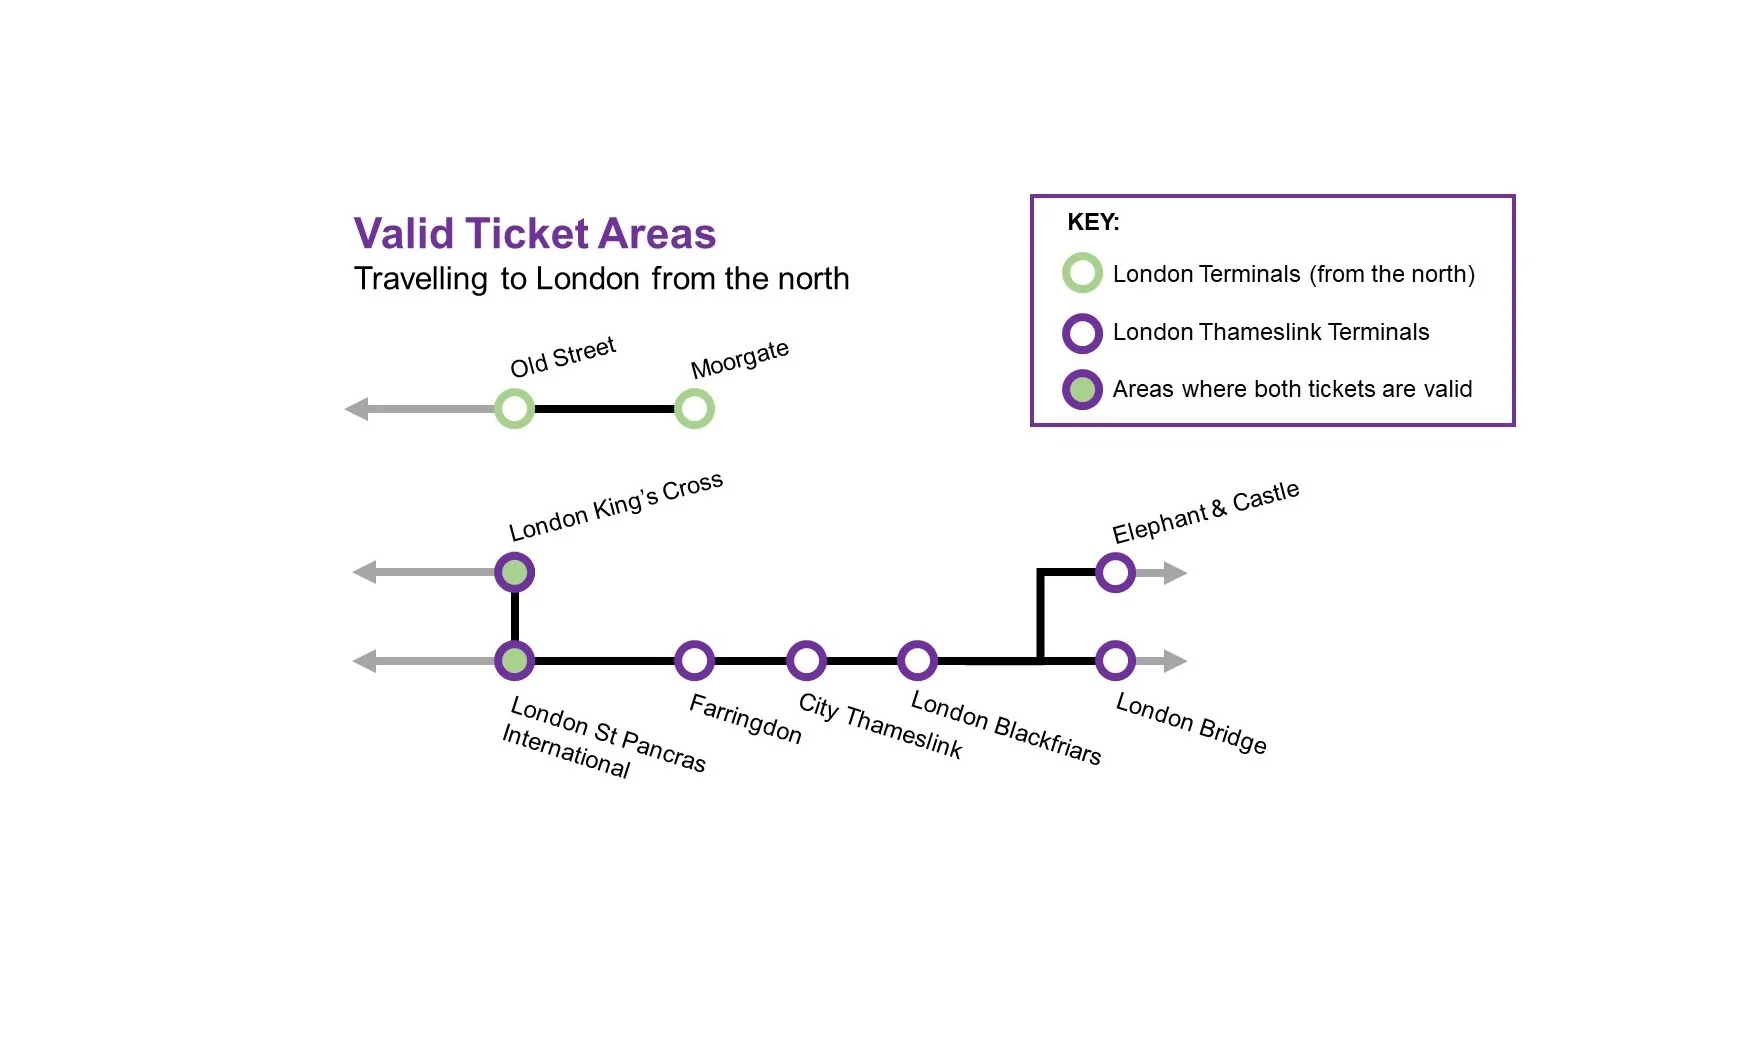 Diagram of stations that London Thameslink or London Terminals tickets are valid to from the north of London,